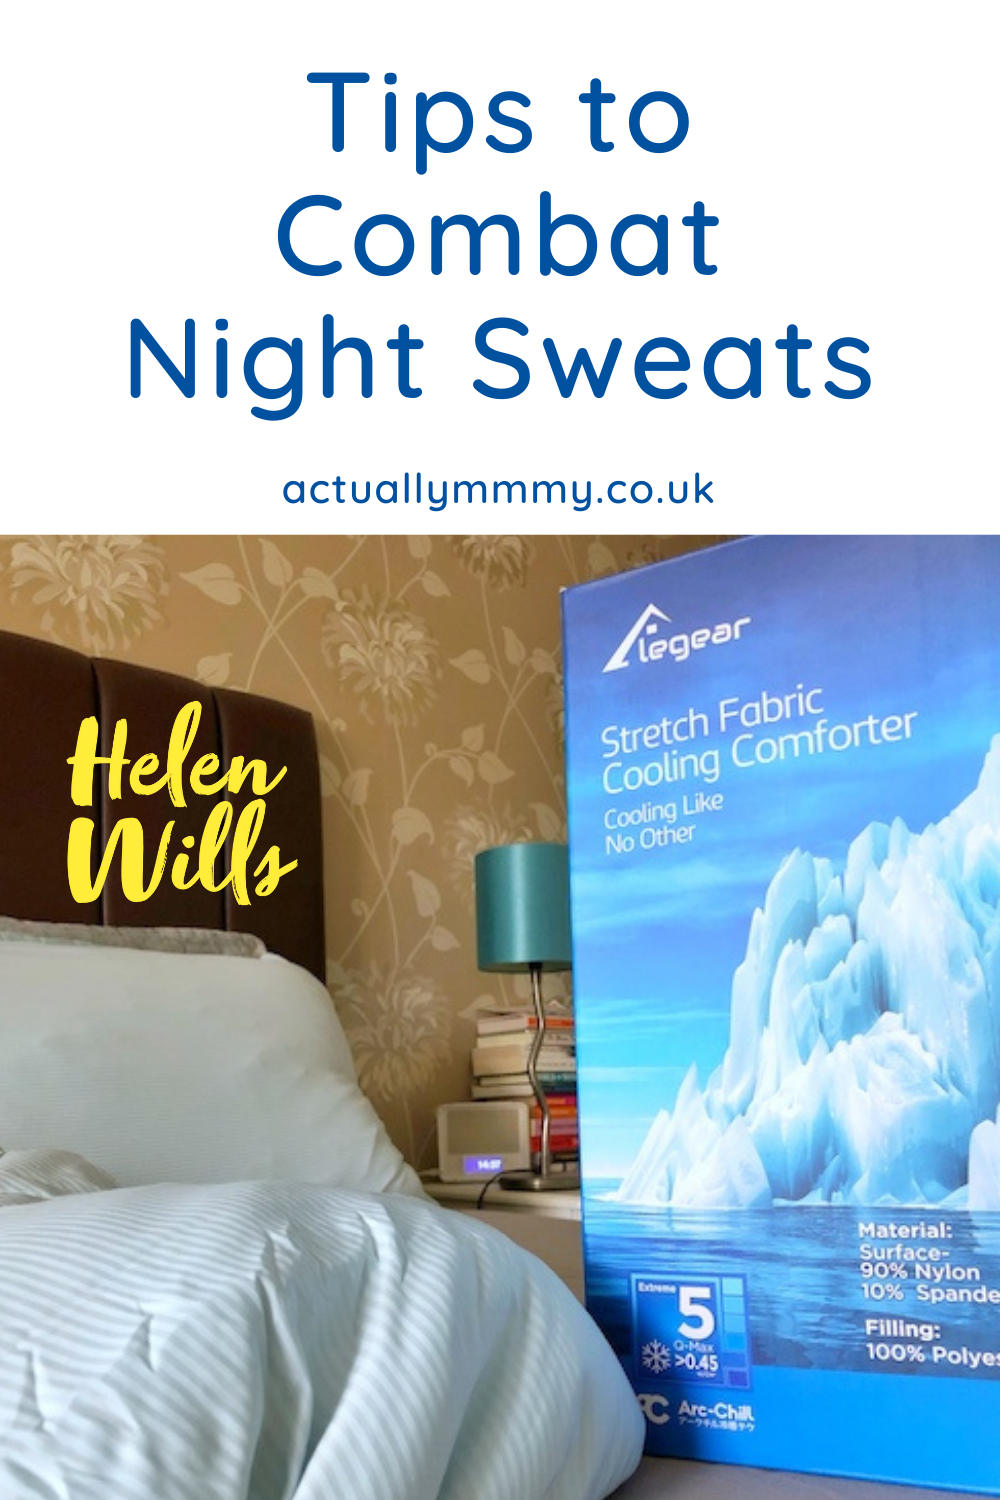 Help with night sweats during menopause and other conditions.